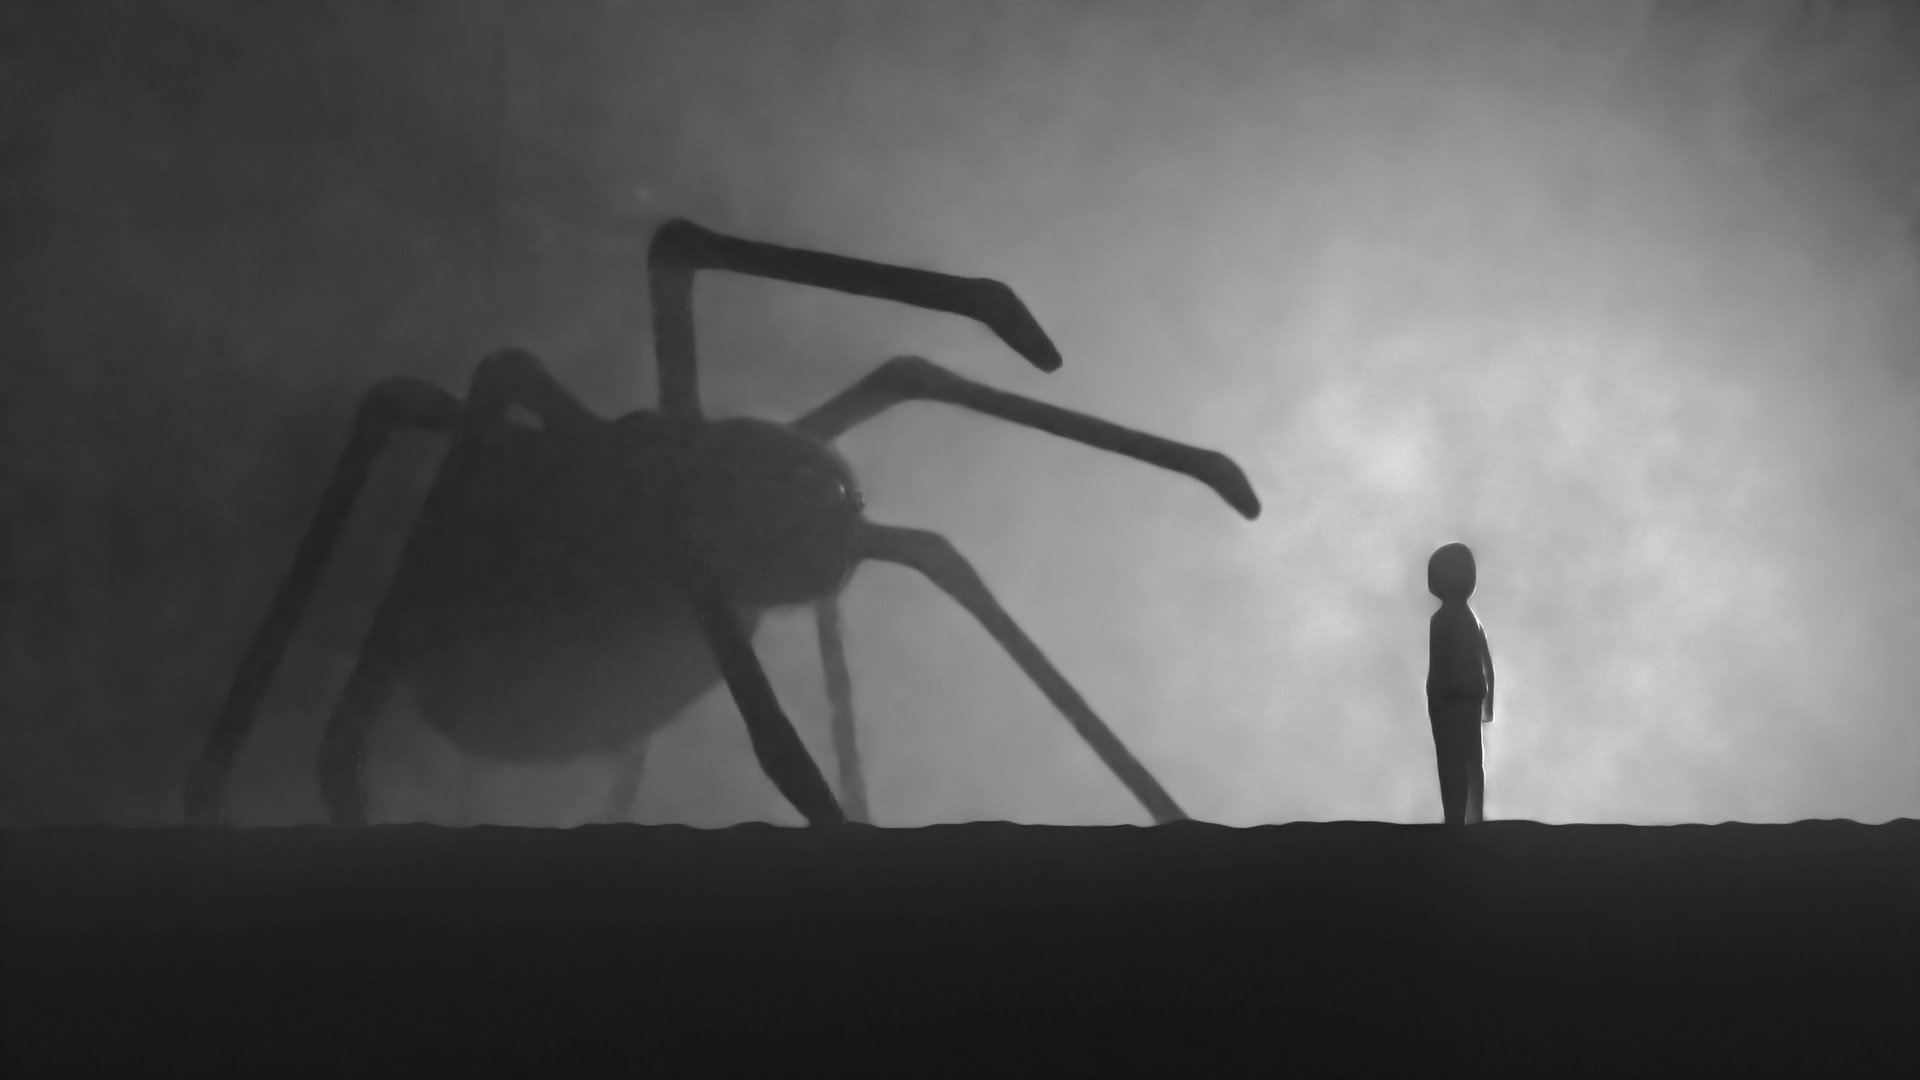 Huge shadowy spider and small person face off